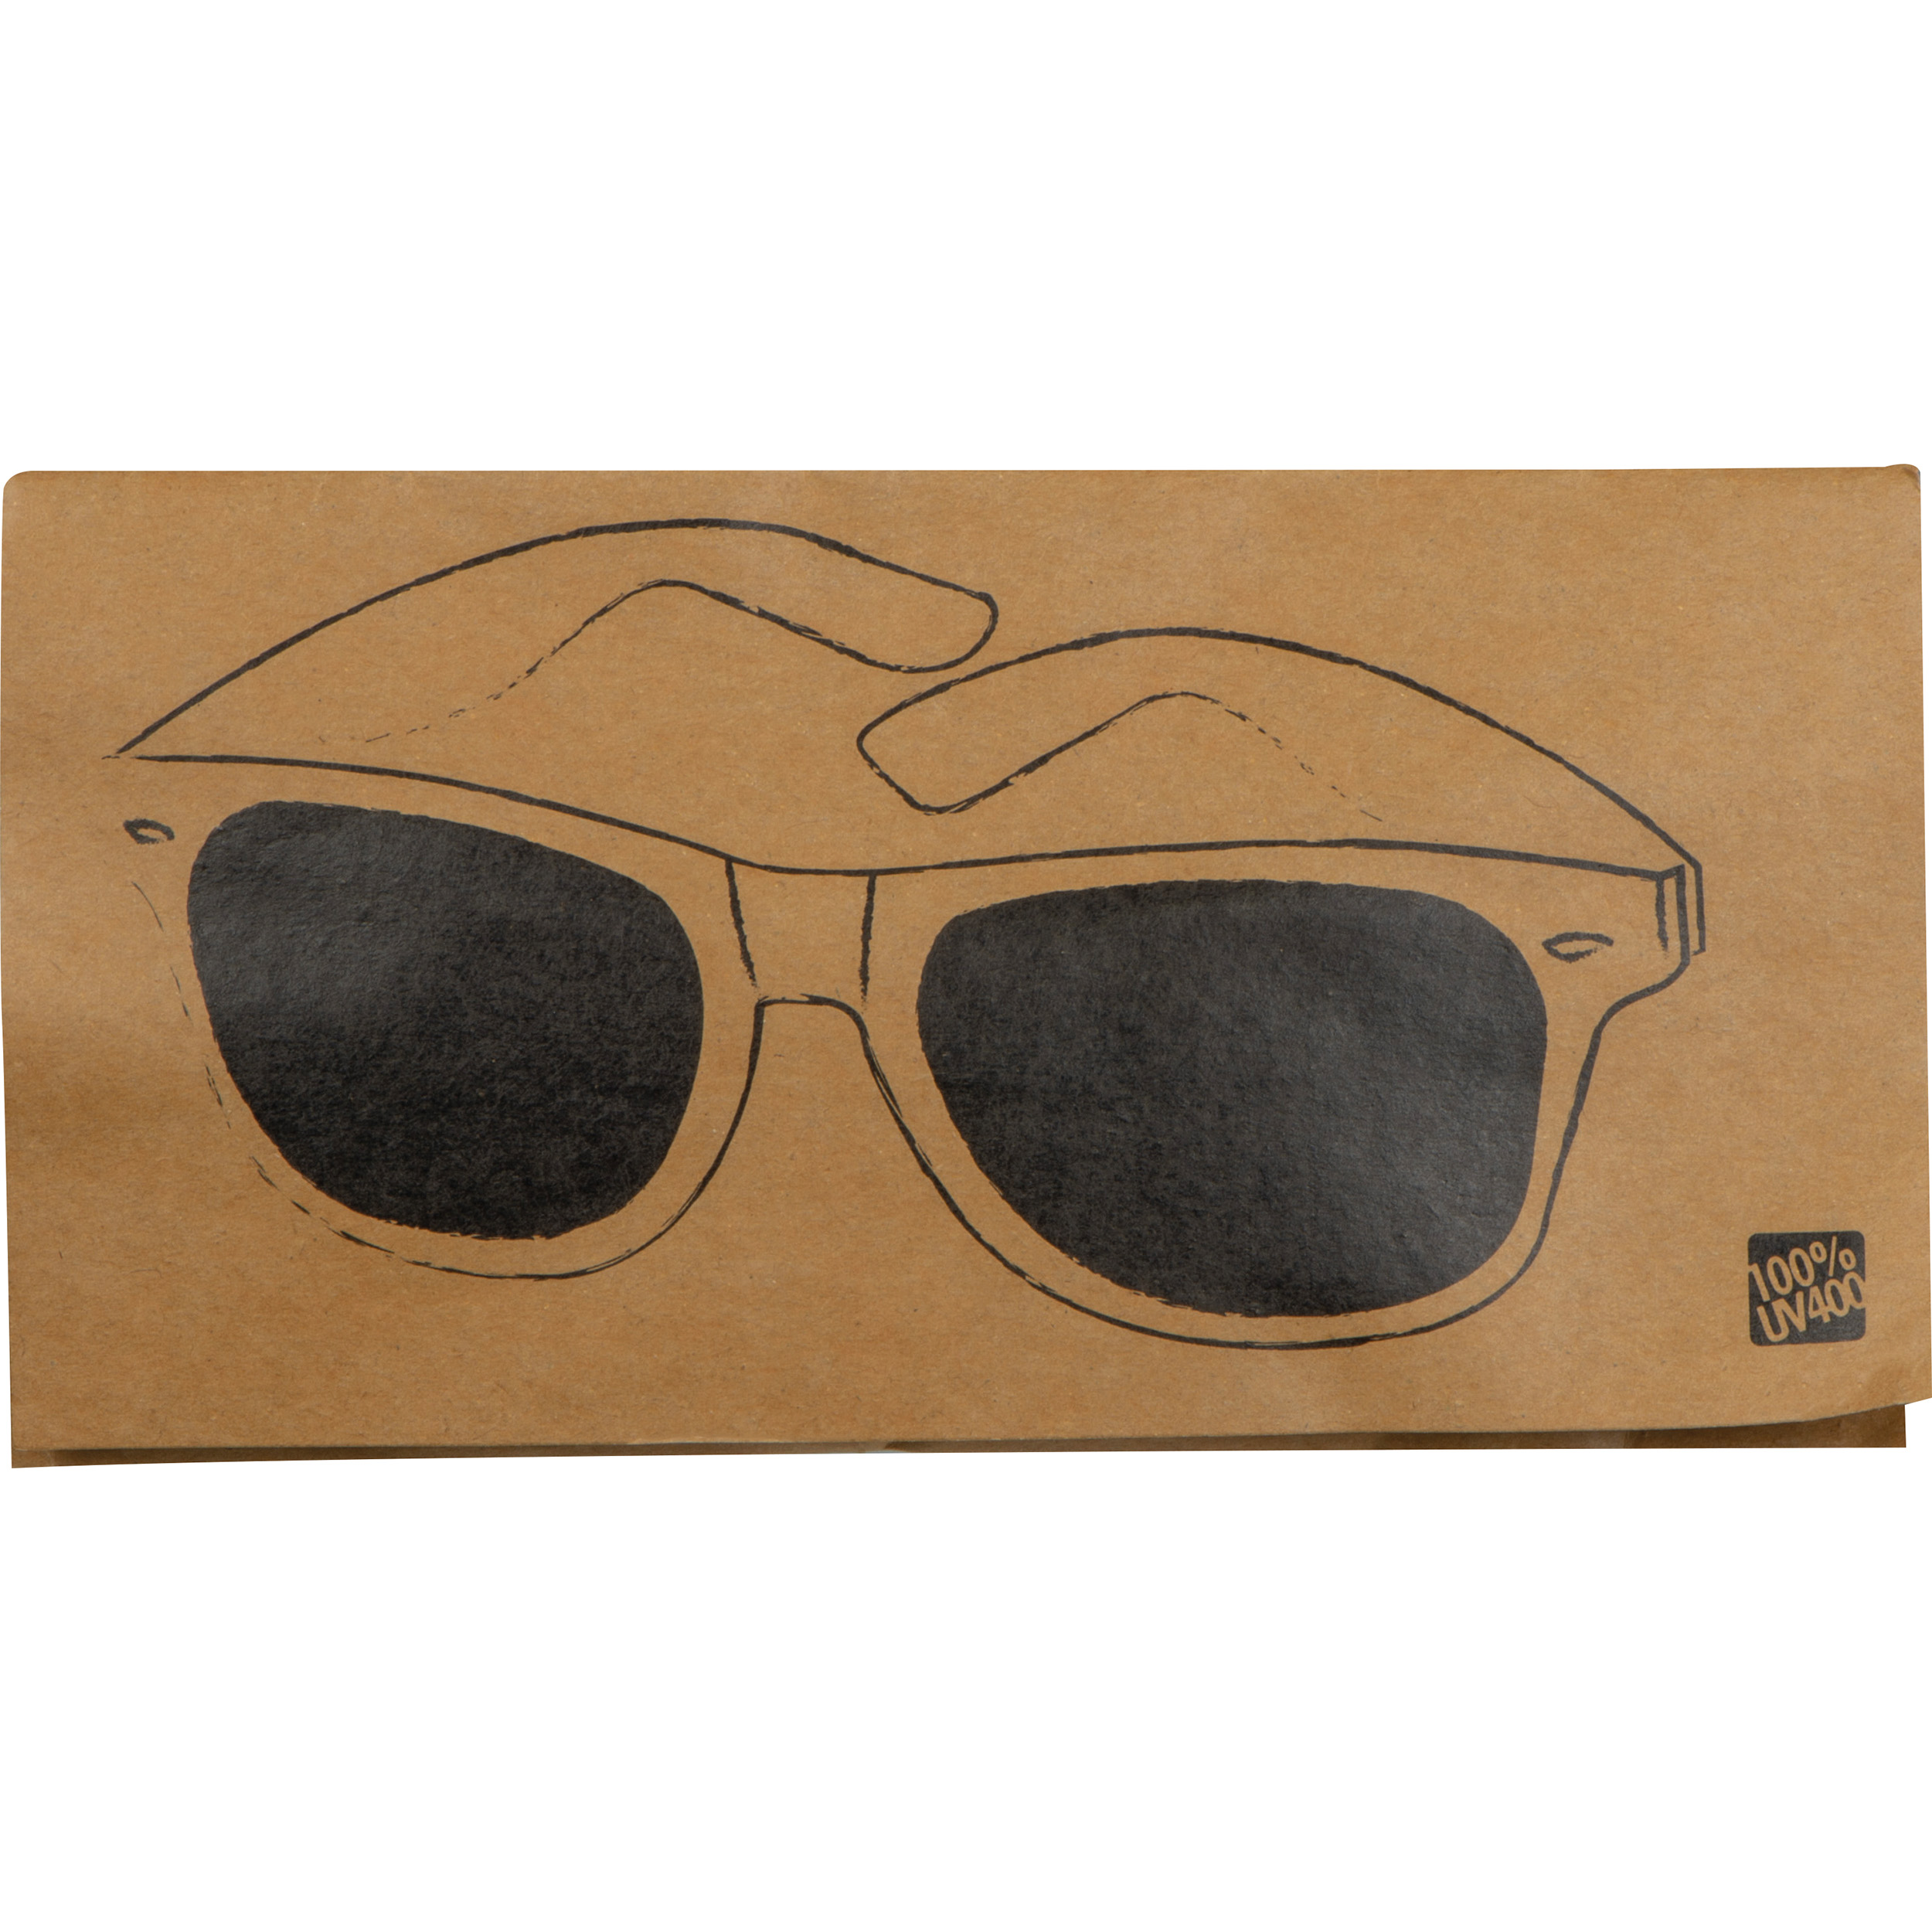 Sunglasses with wooden-look temples